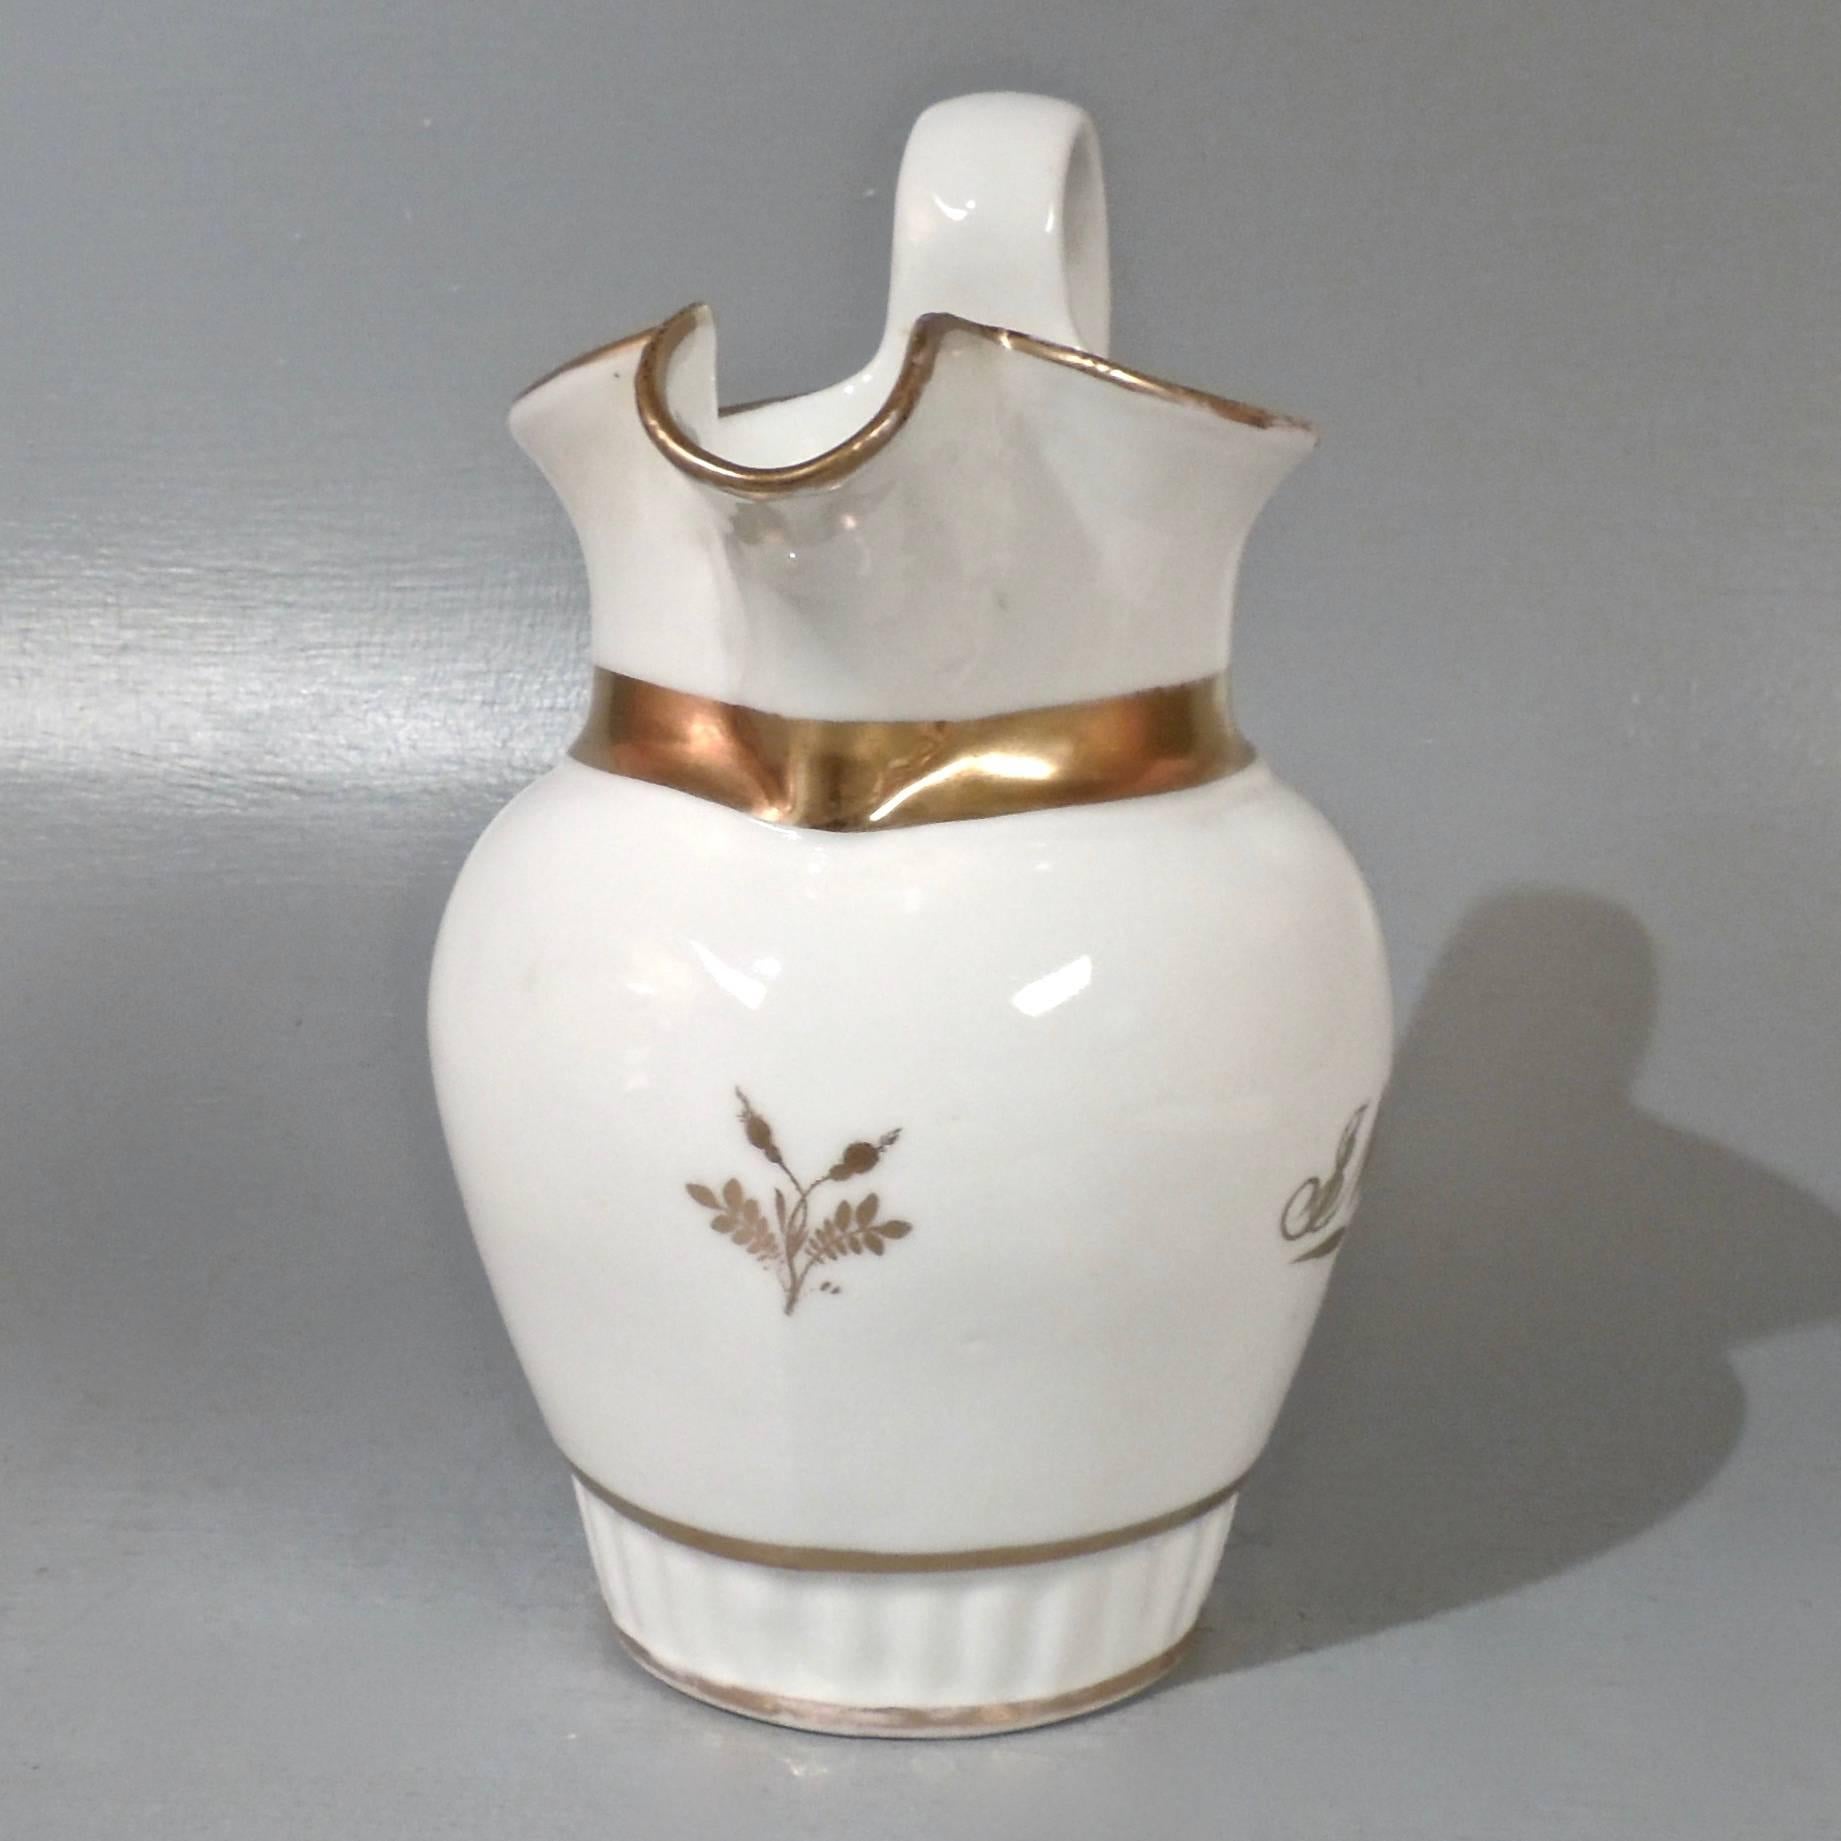 American Classical Rare Early 19th Century American Porcelain Pitcher by Tucker & Hemphill